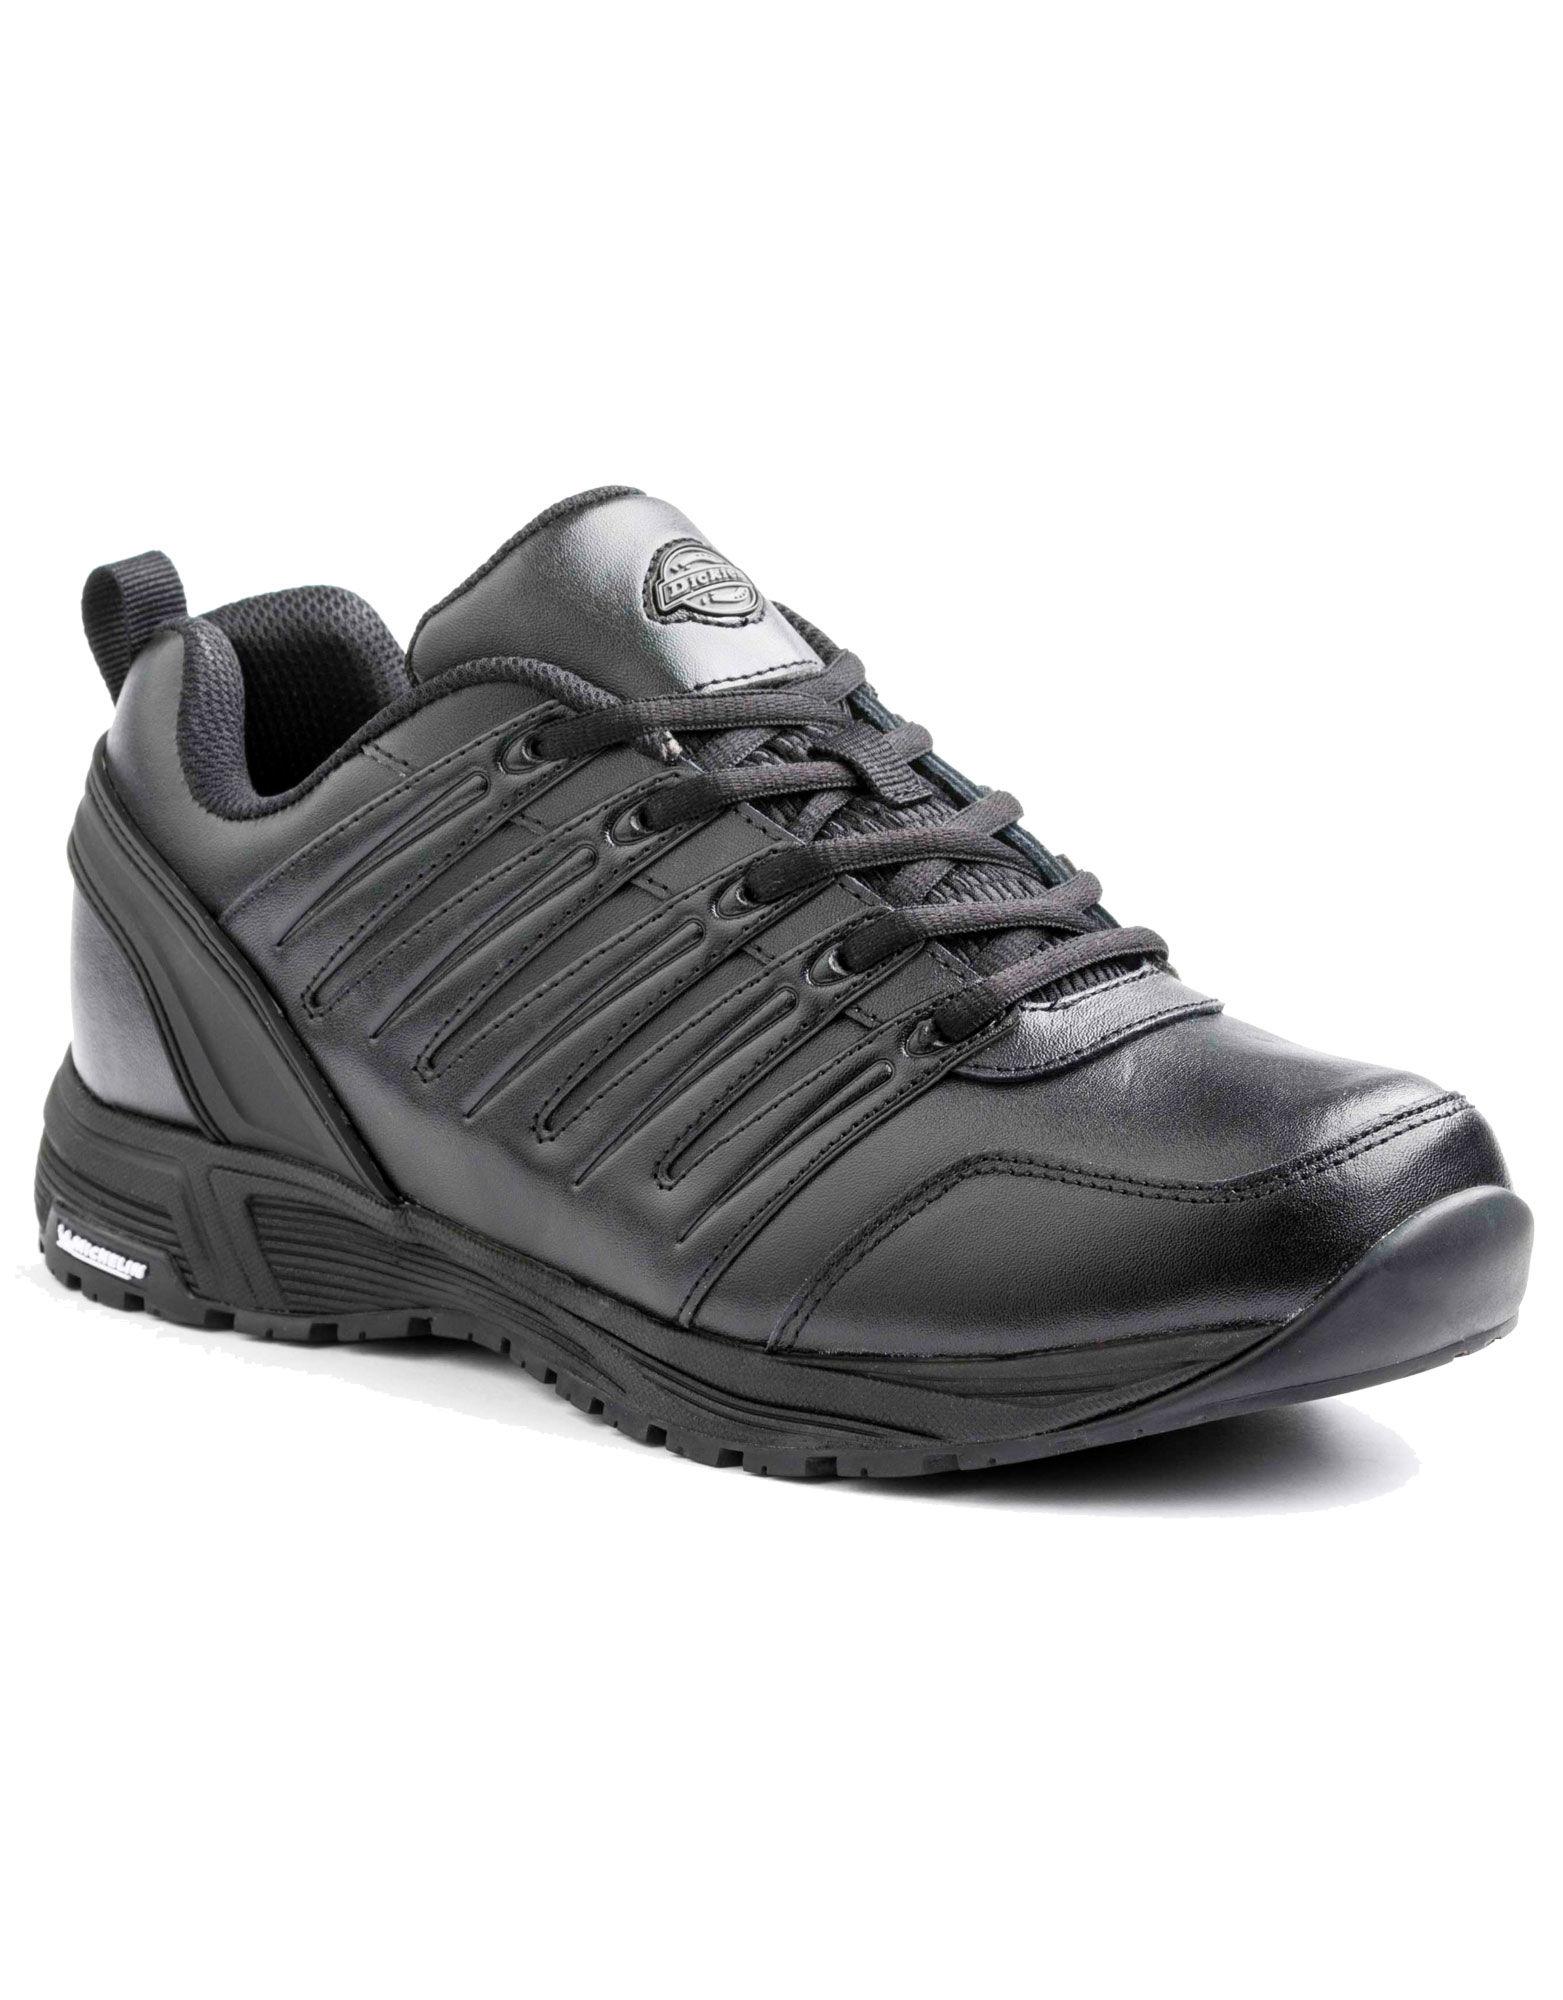 Apex Slip Resistant Shoe With Michelin 